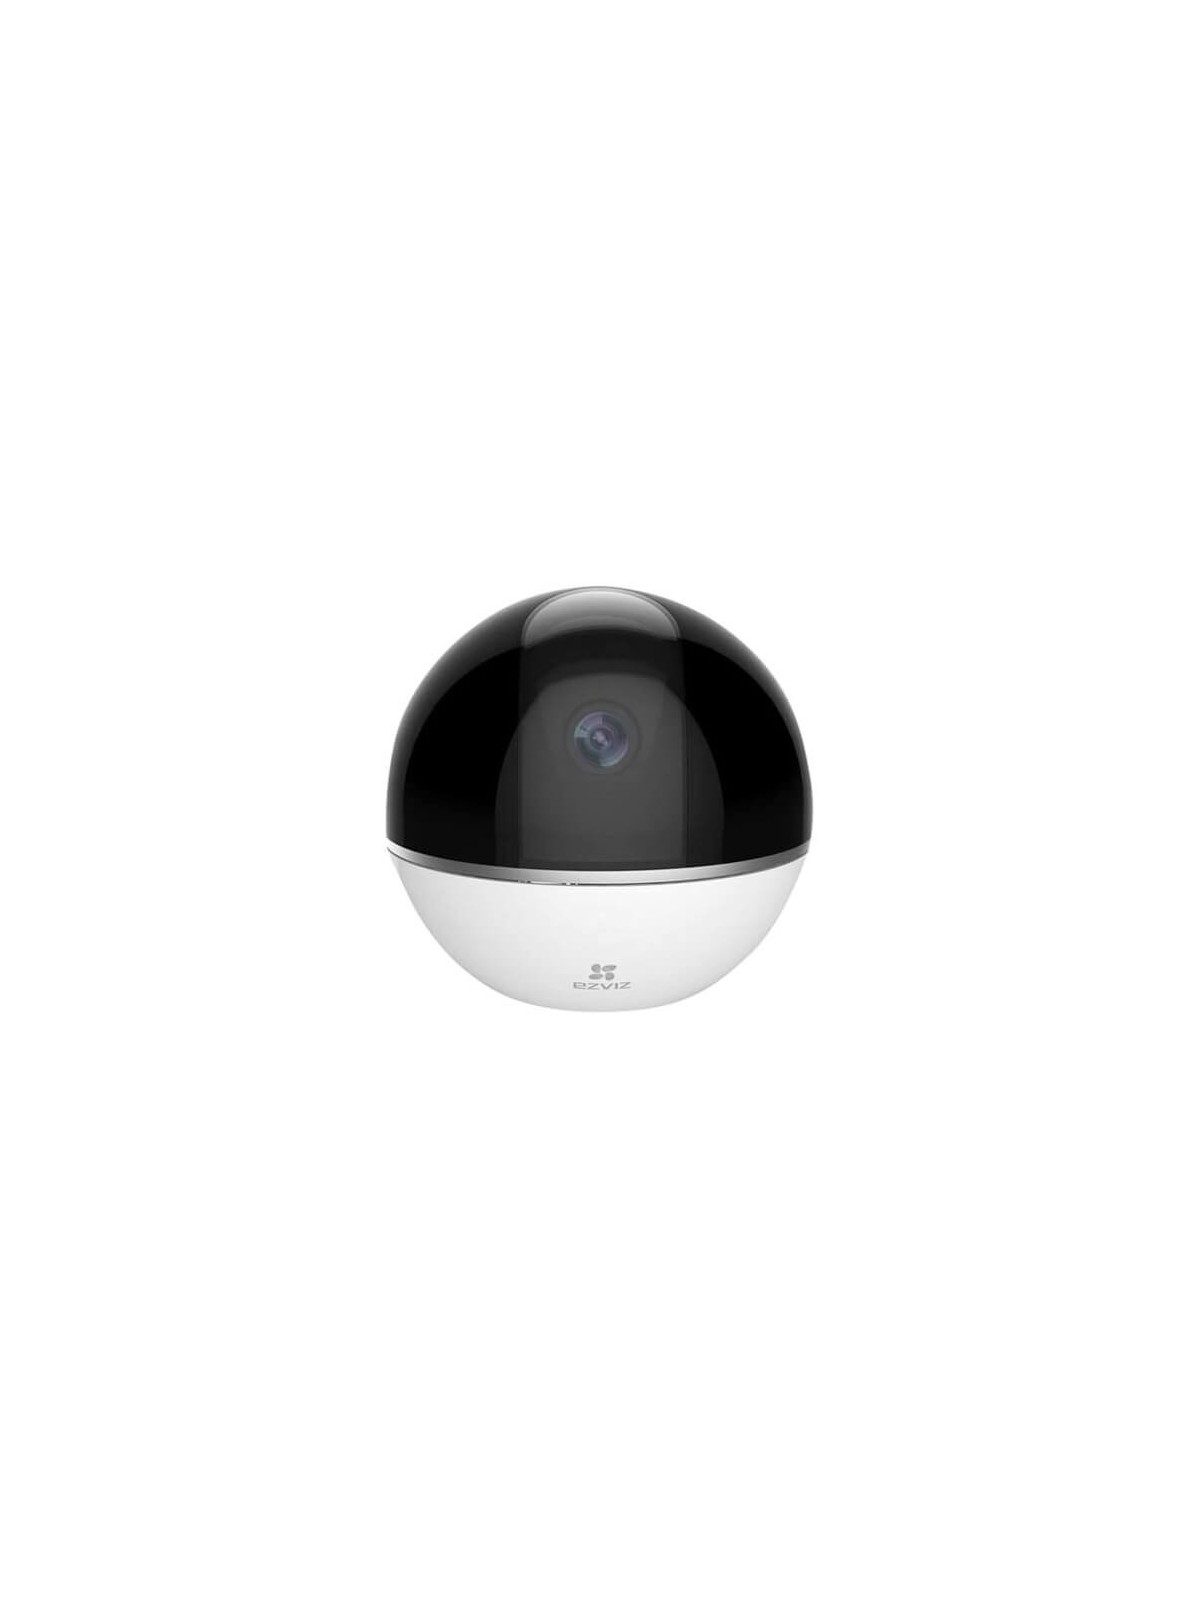 Cámara IP Ezviz EZ-C6TC 2MP IR10m 4mm H264 Wifi SD Audio Smart Tracking